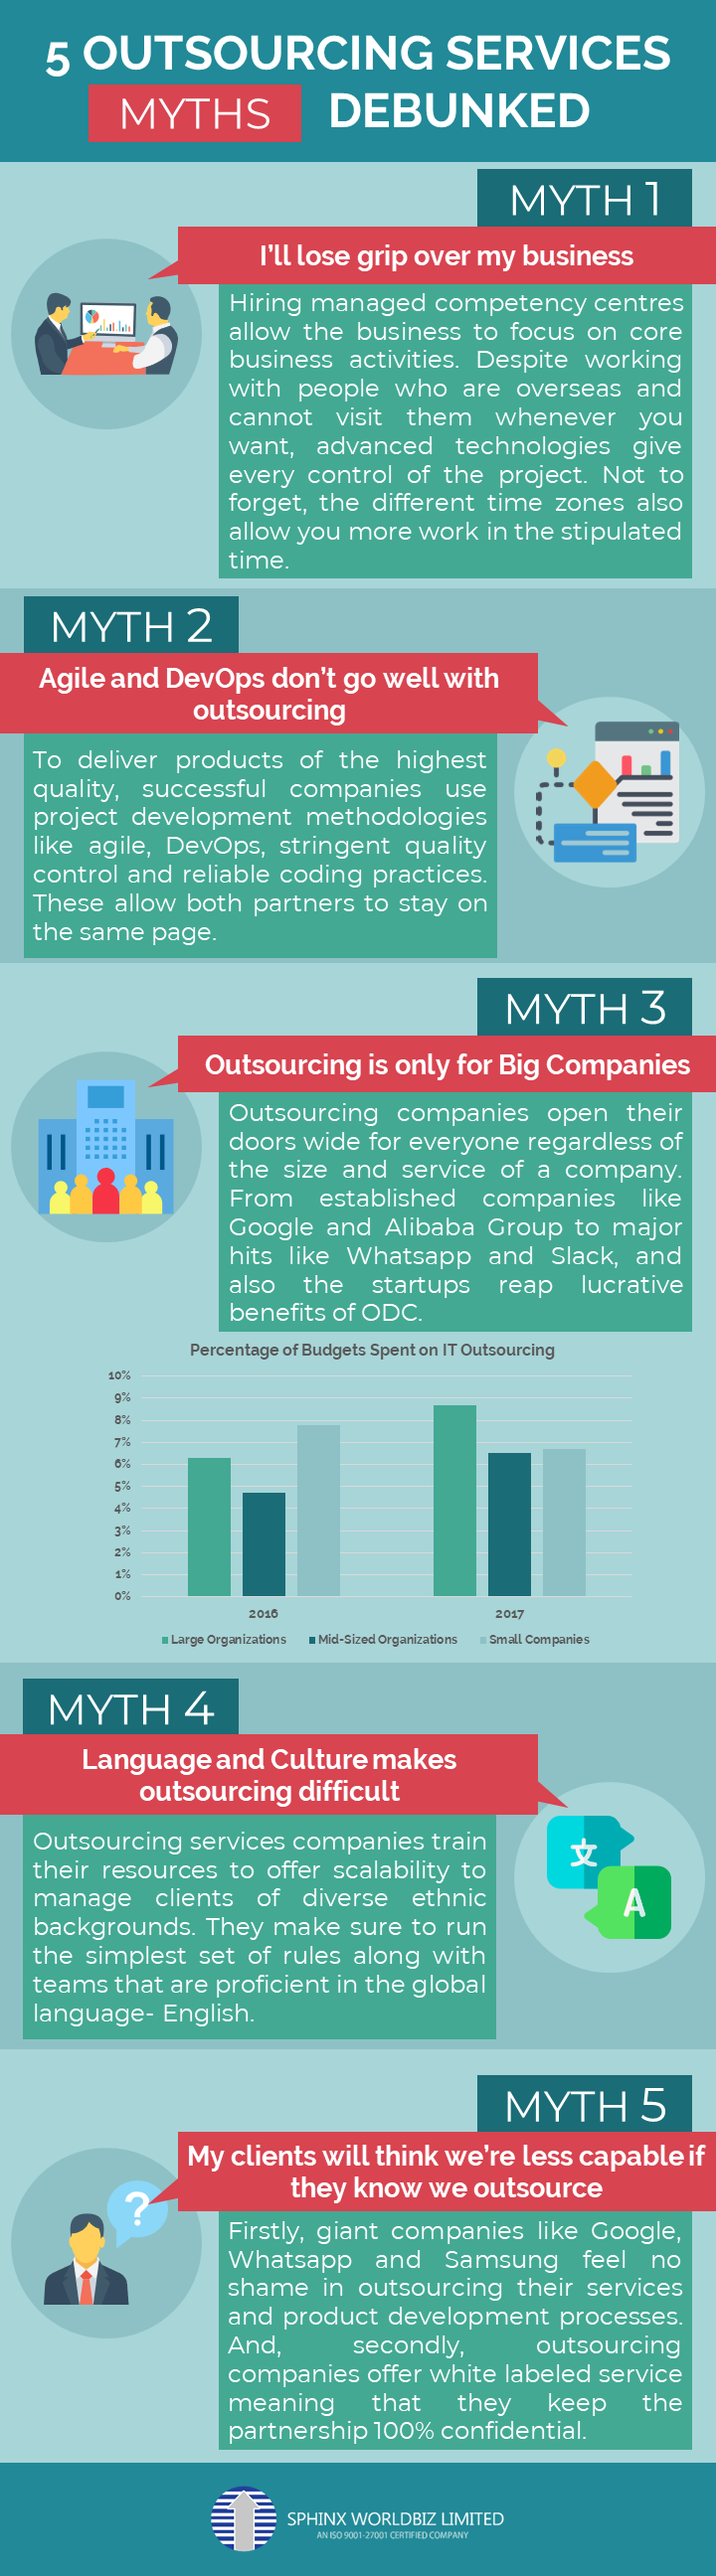 Outsourcing Services Myths Debunked